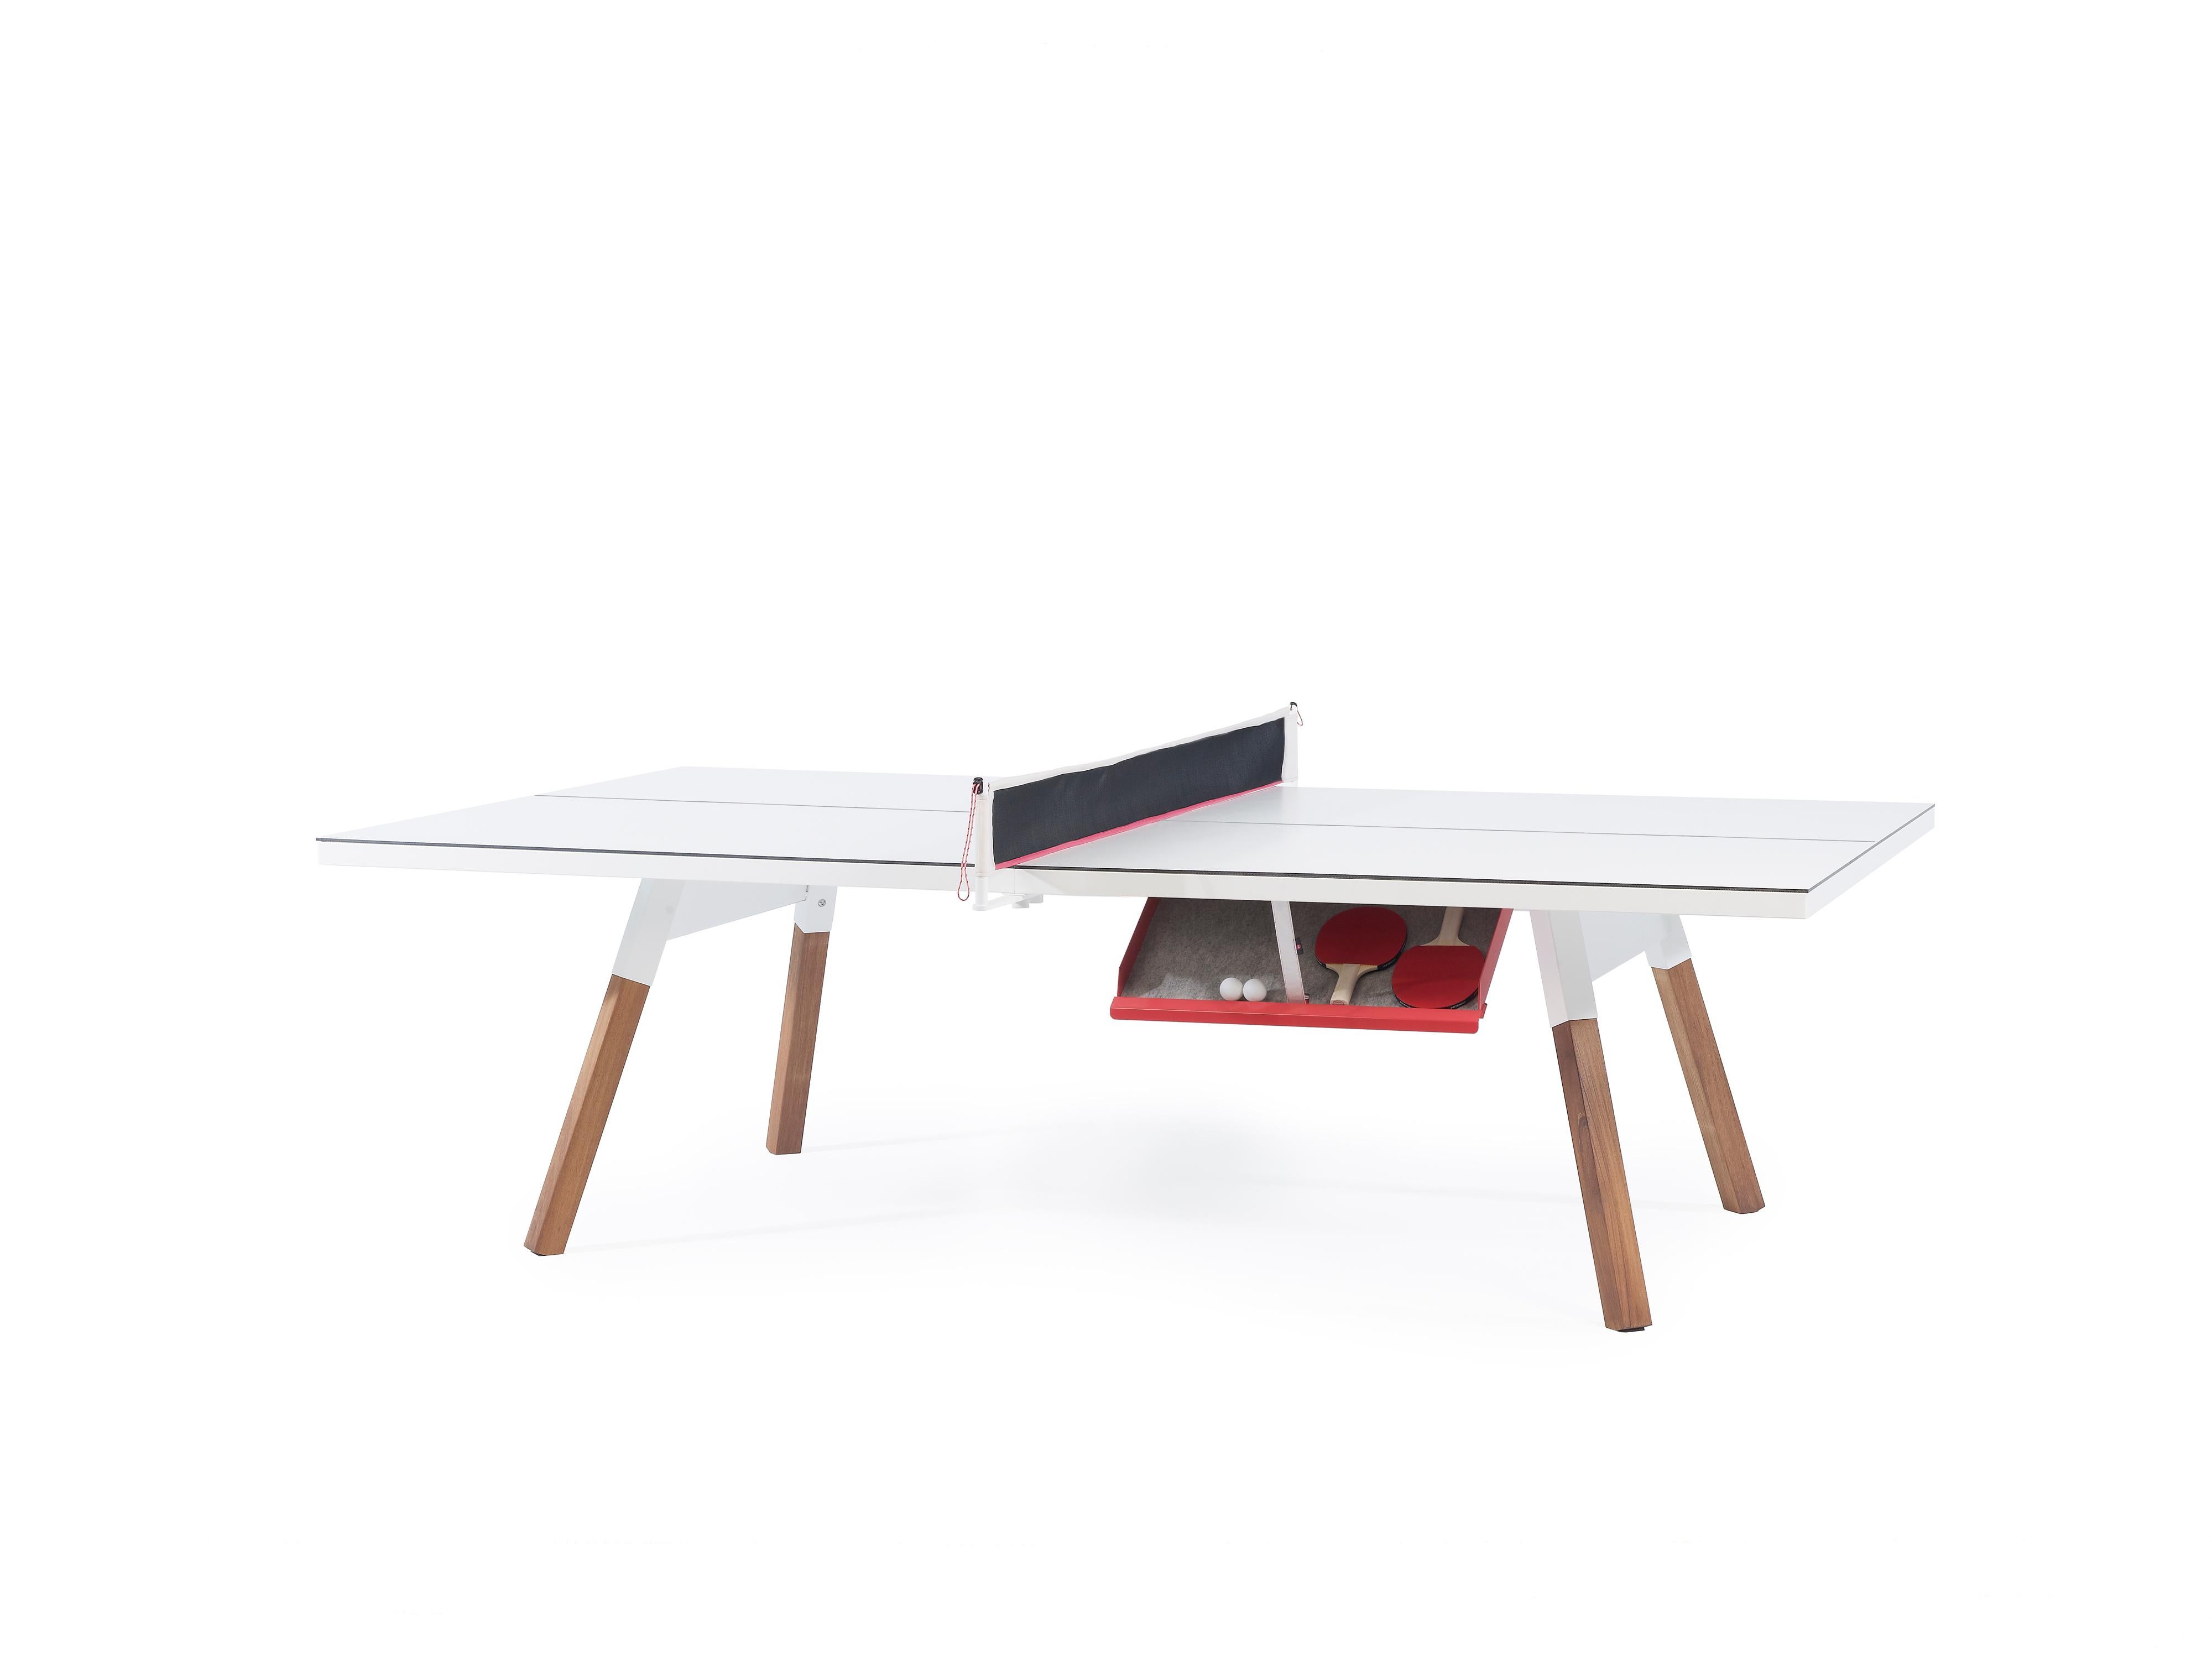 The  You and Me ping-pong table is a standard sized game table that doubles as a dining or conference table. All the sportiness that it gets from the net, the bats, and the balls, can be put in the side drawer and hidden away completely. Built from